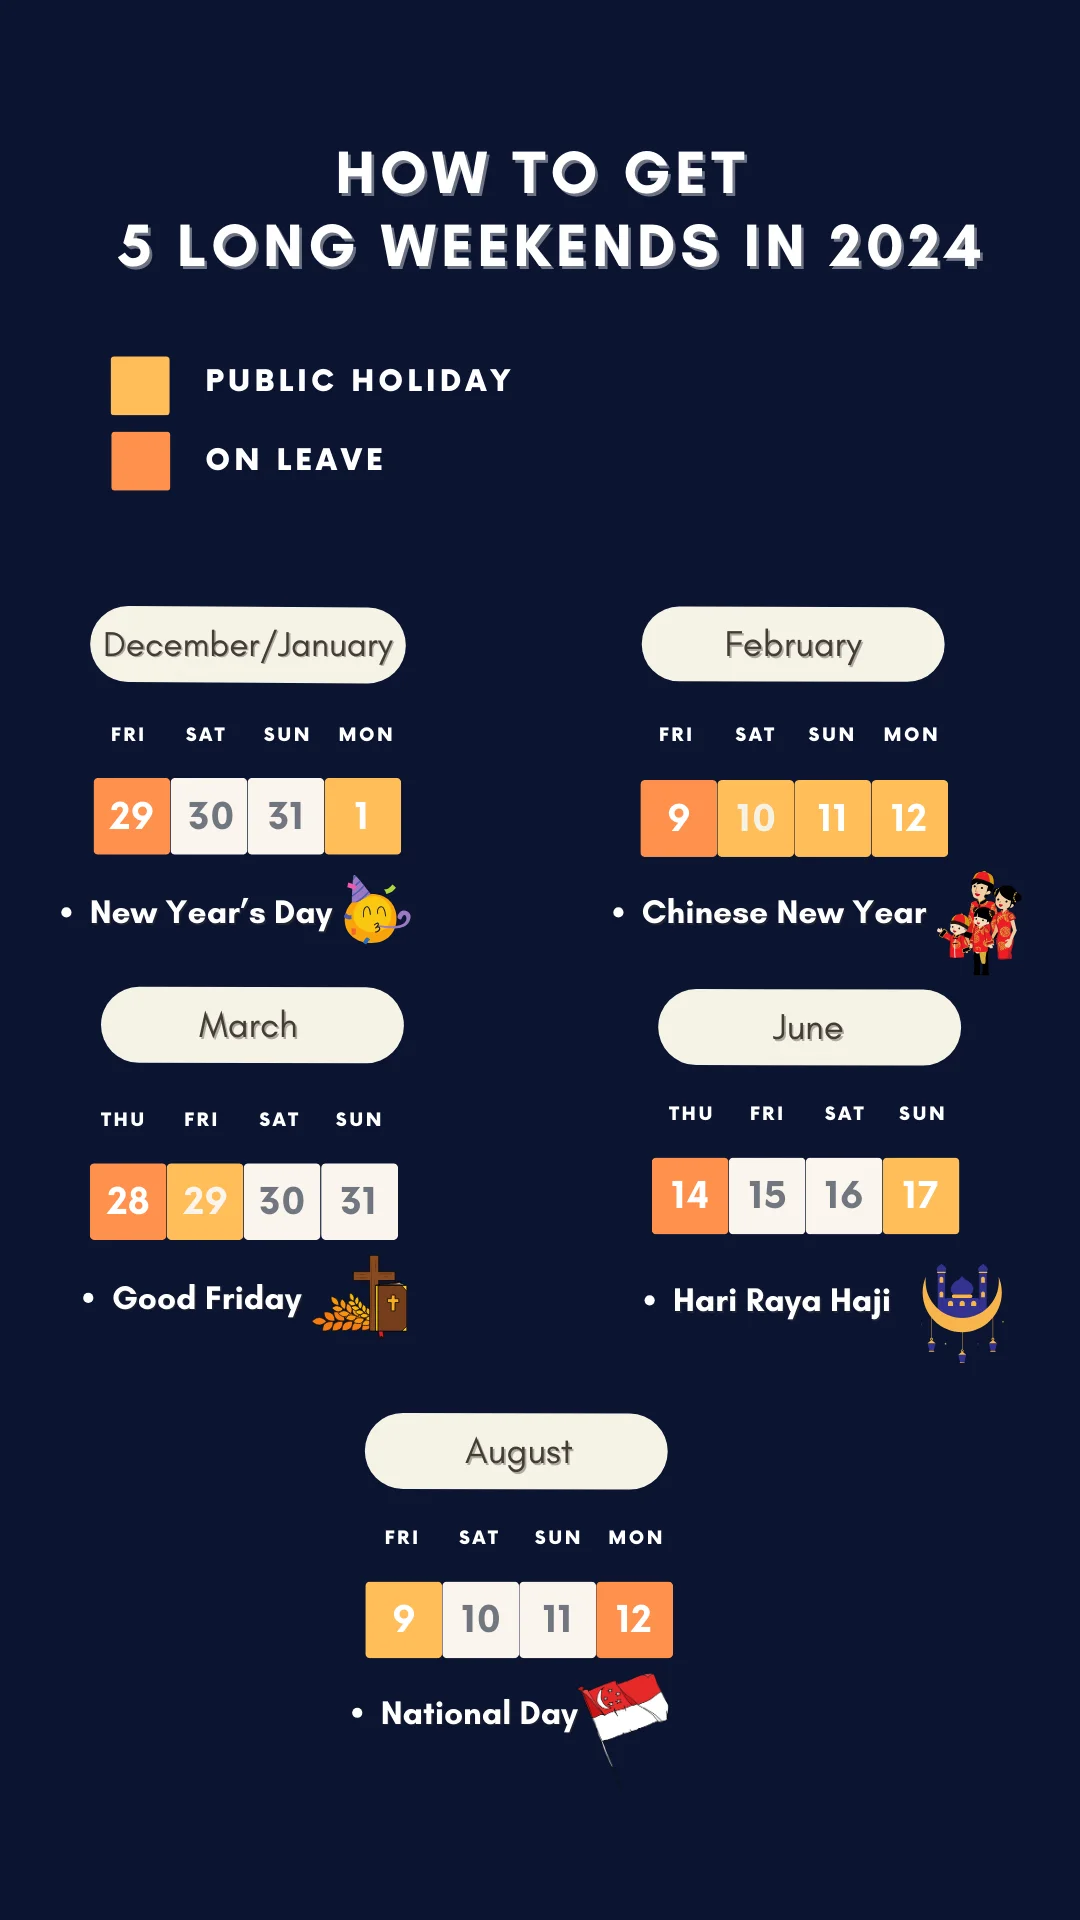 Singapore Public Holidays in 2024 with 5 long weekends